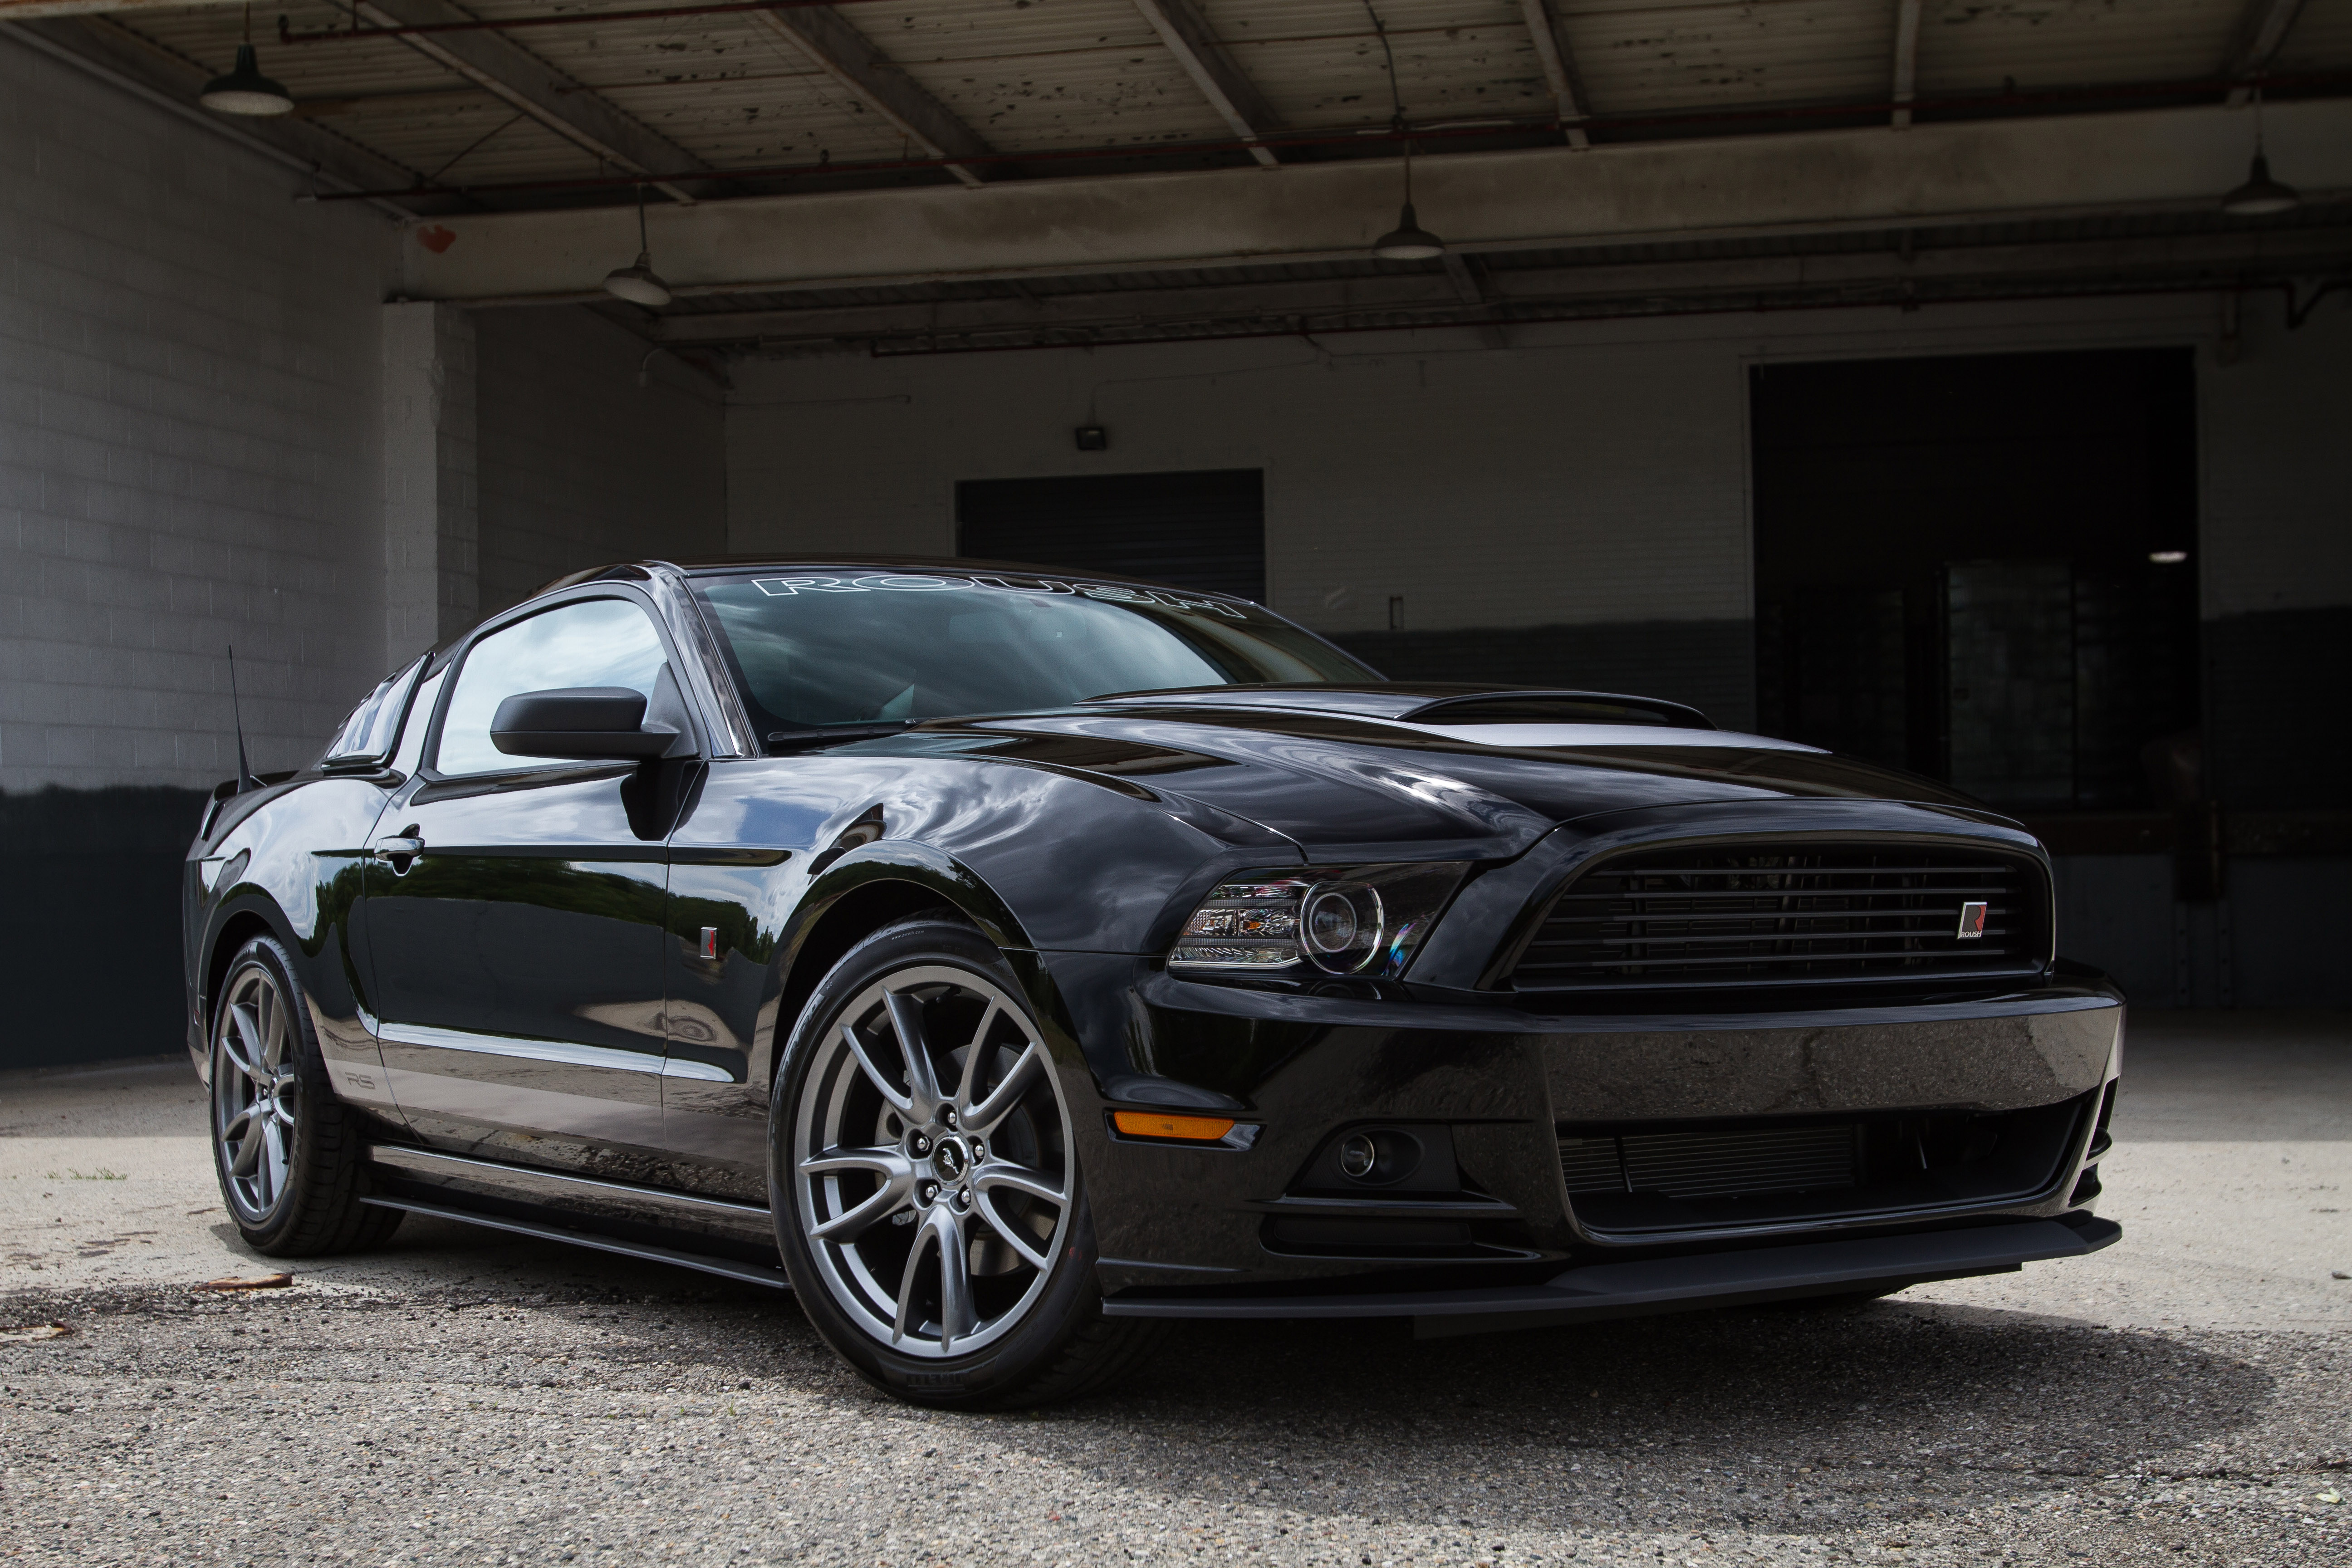 2013, Roush, Ford, Mustang, R s, Muscle, Tuning Wallpaper